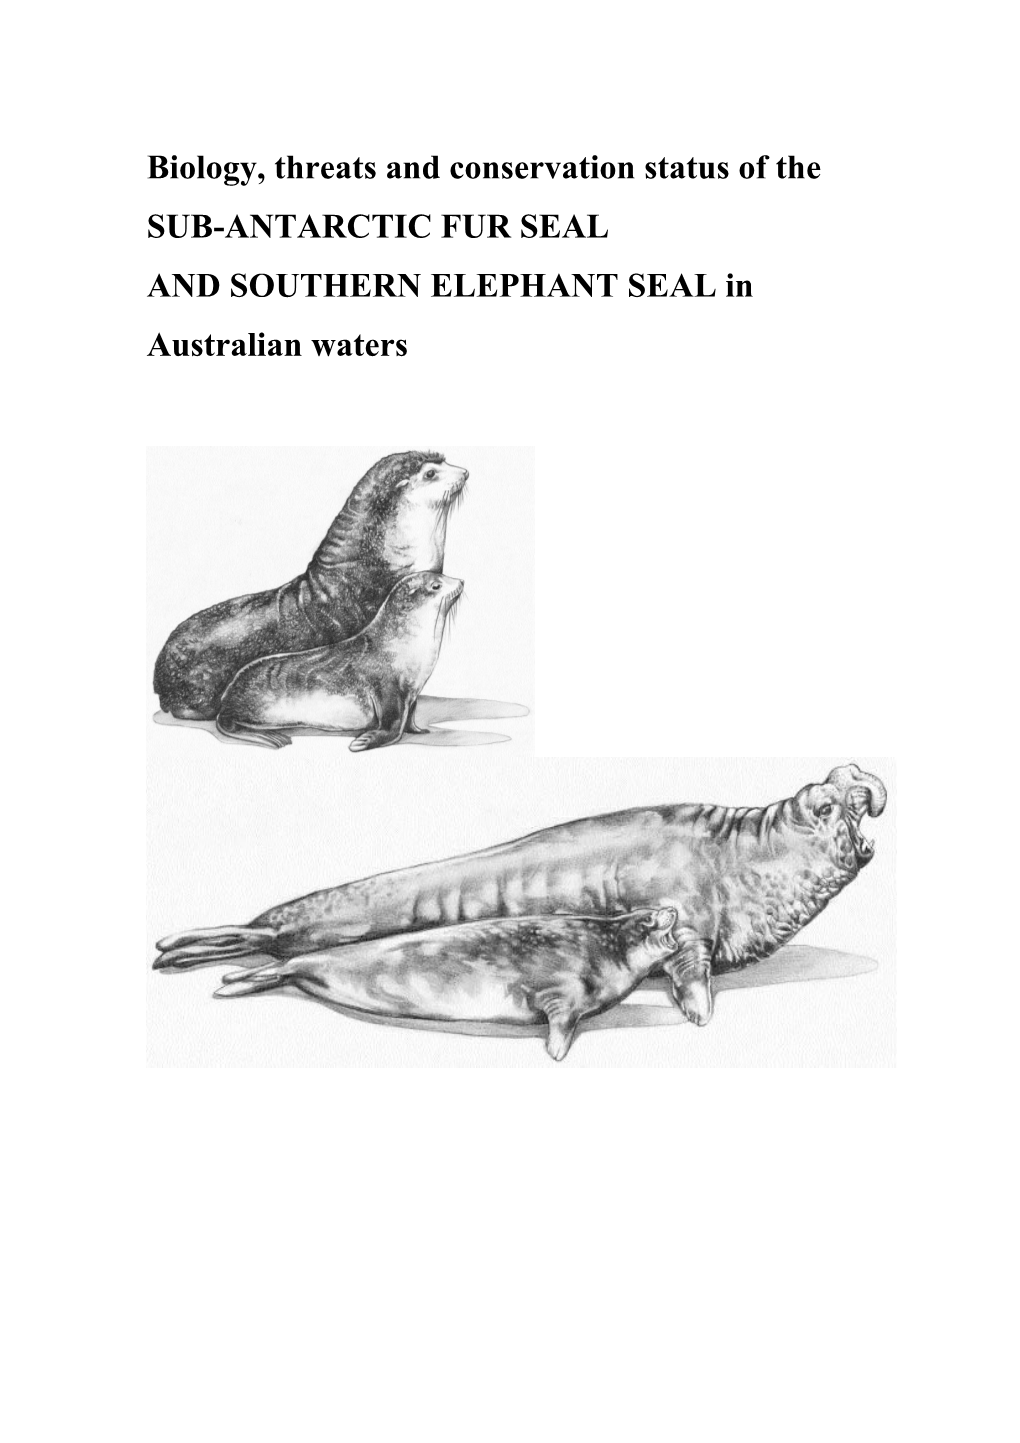 Biology, Threats and Conservation Status of the Sub-Antarctic Fur Seal and Southern Elephant